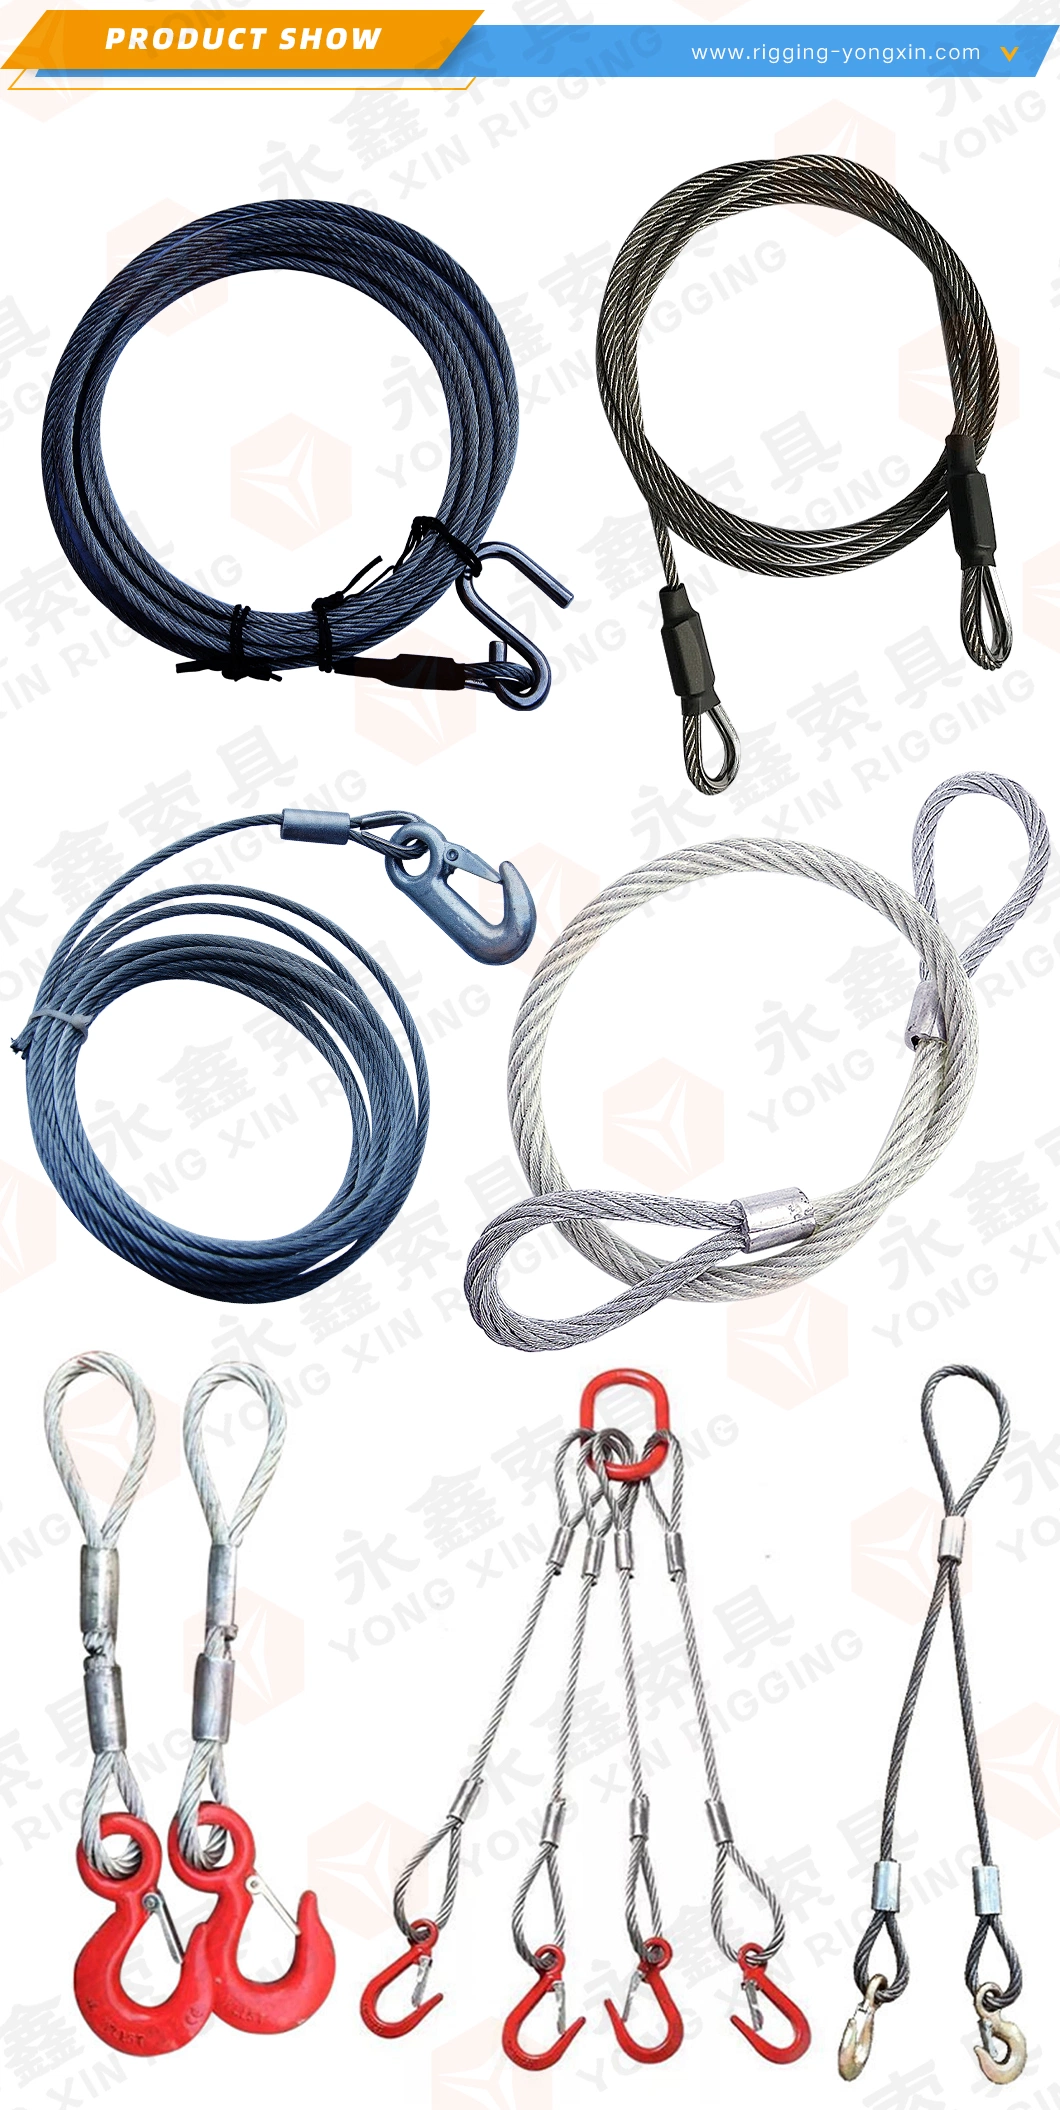 Superior Quality PVC Coated Steel Wire Rope Sling with Strong Snap Hook Carabiner